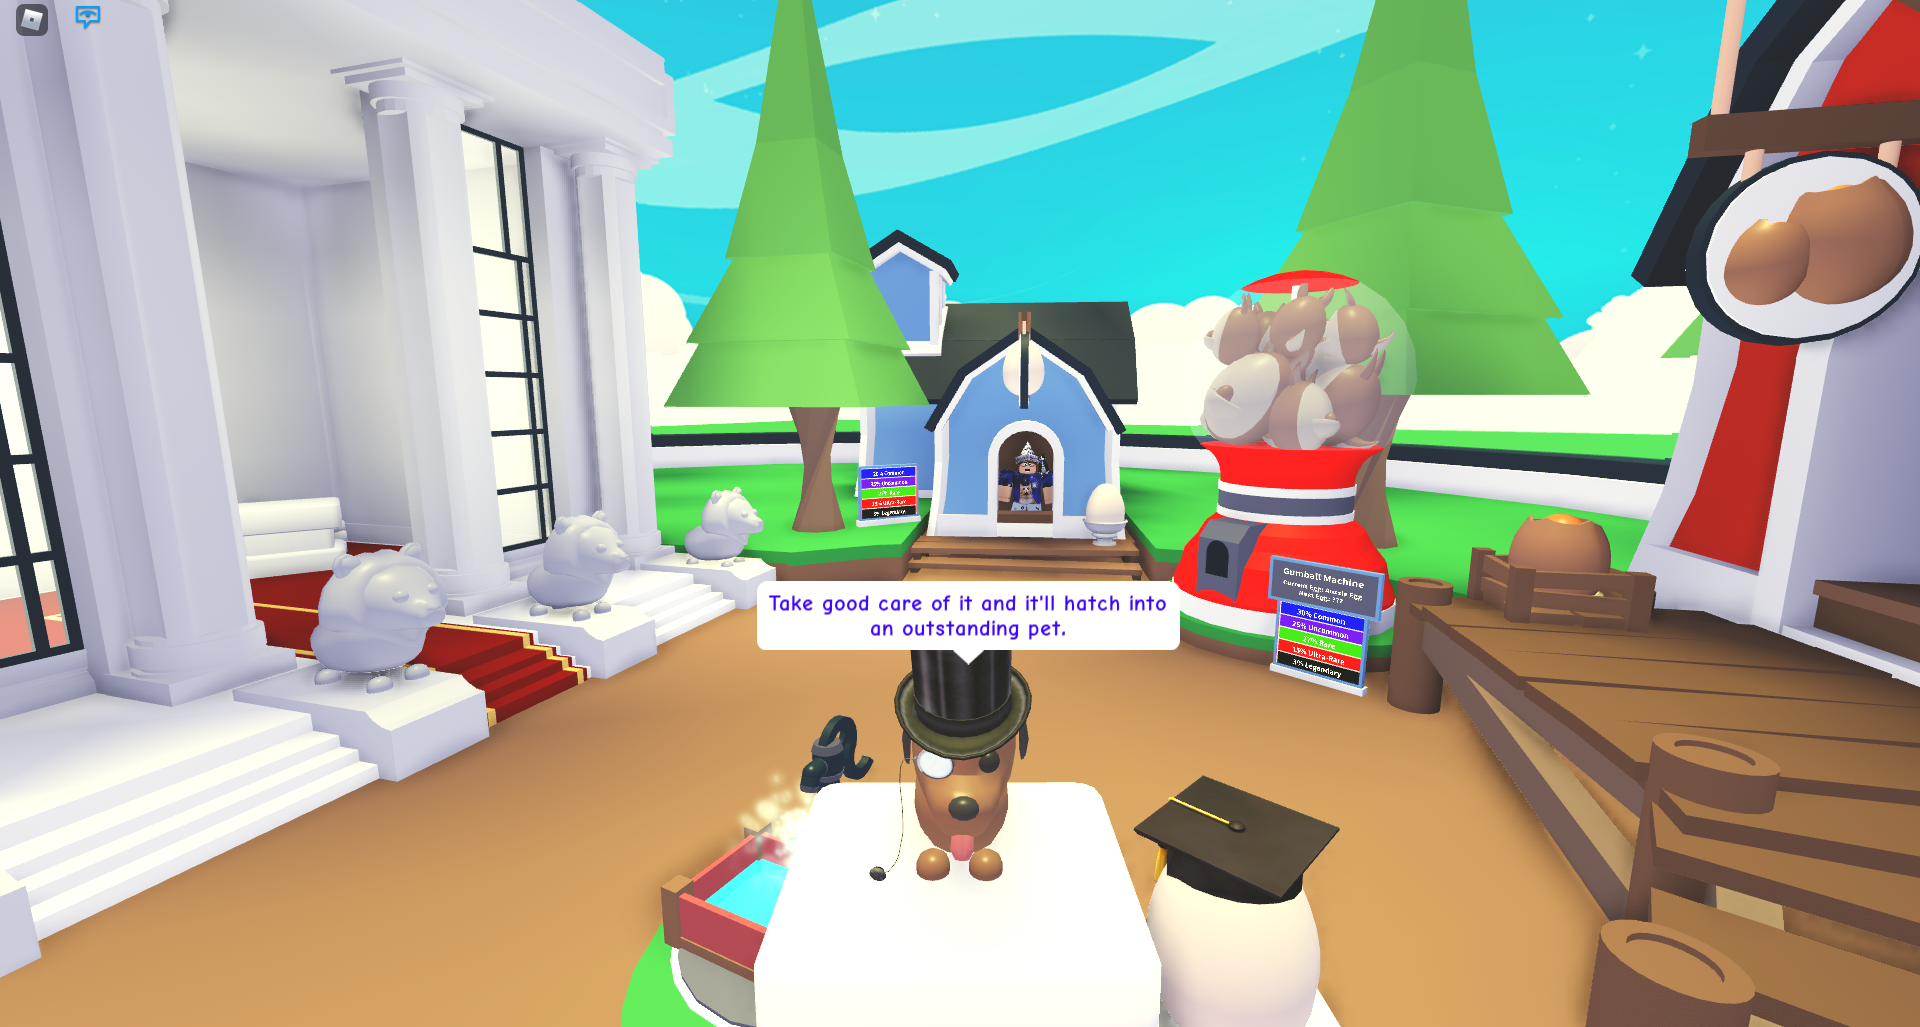 What Is Adopt Me One Of The Most Popular Games On Roblox - 6 secrets in adopt me you didnt know roblox adopt me